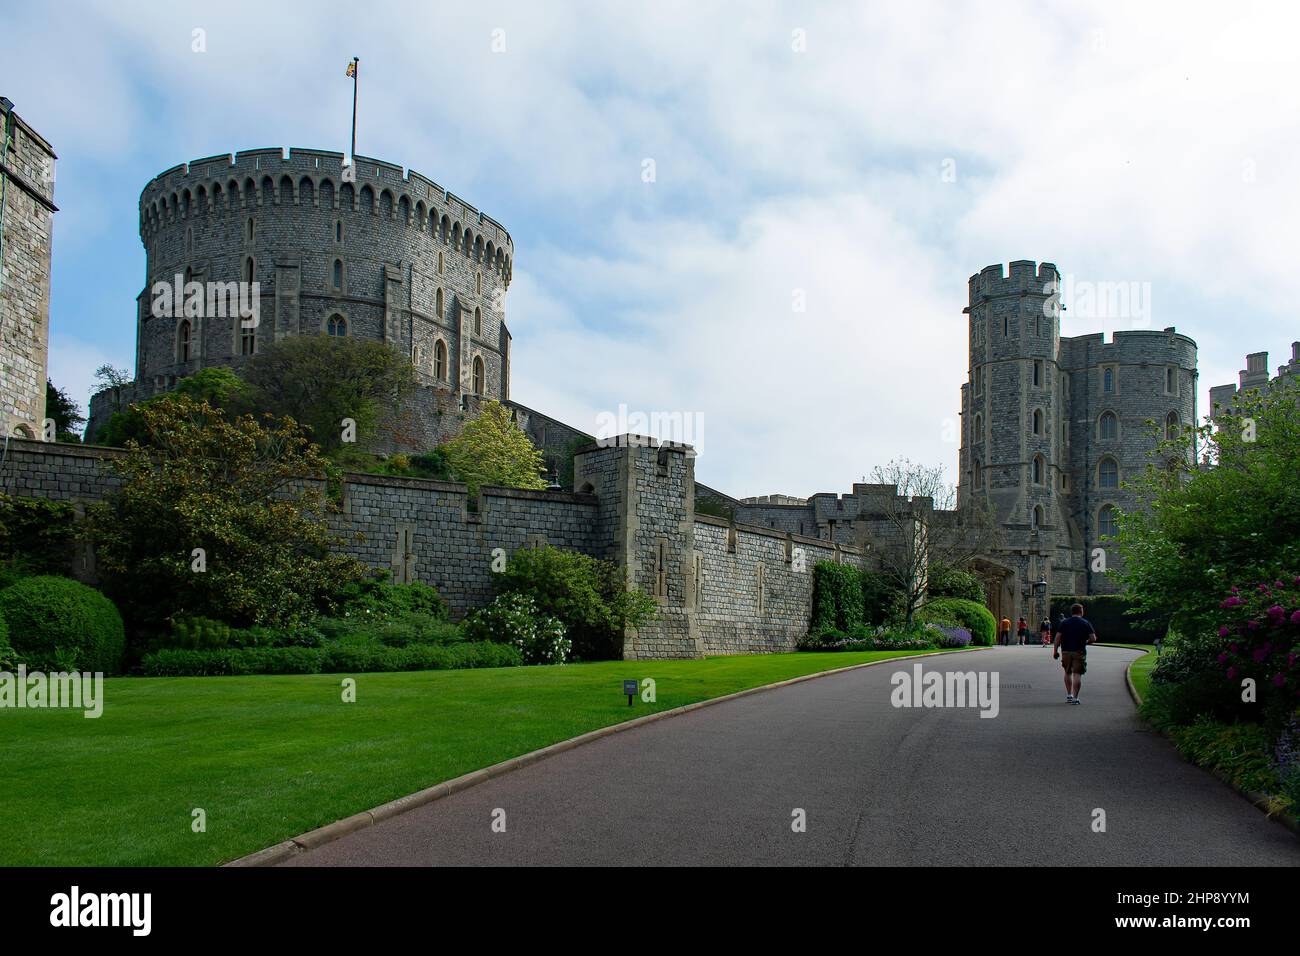 A male visitor on Castle Hill Road towards the entrance of Windsor Castle. The Round Tower and Edward III Tower stand over the castle walls. Stock Photo